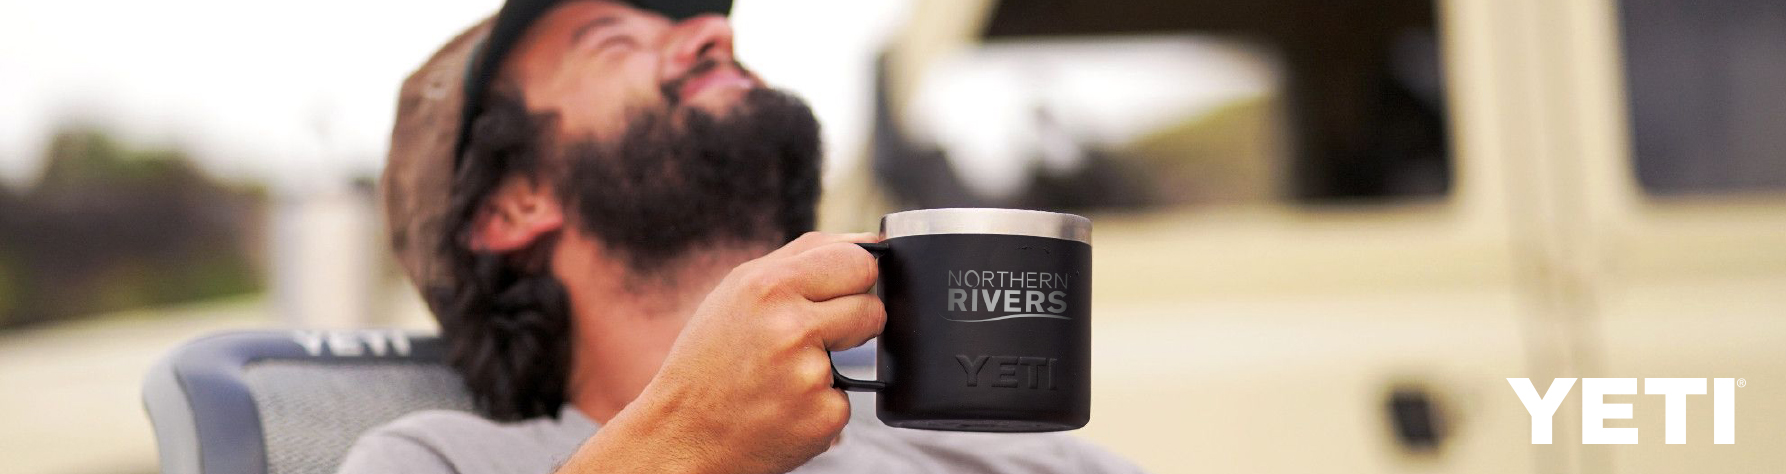 Yeti Rambler 20 oz Tumbler - HPG - Promotional Products Supplier